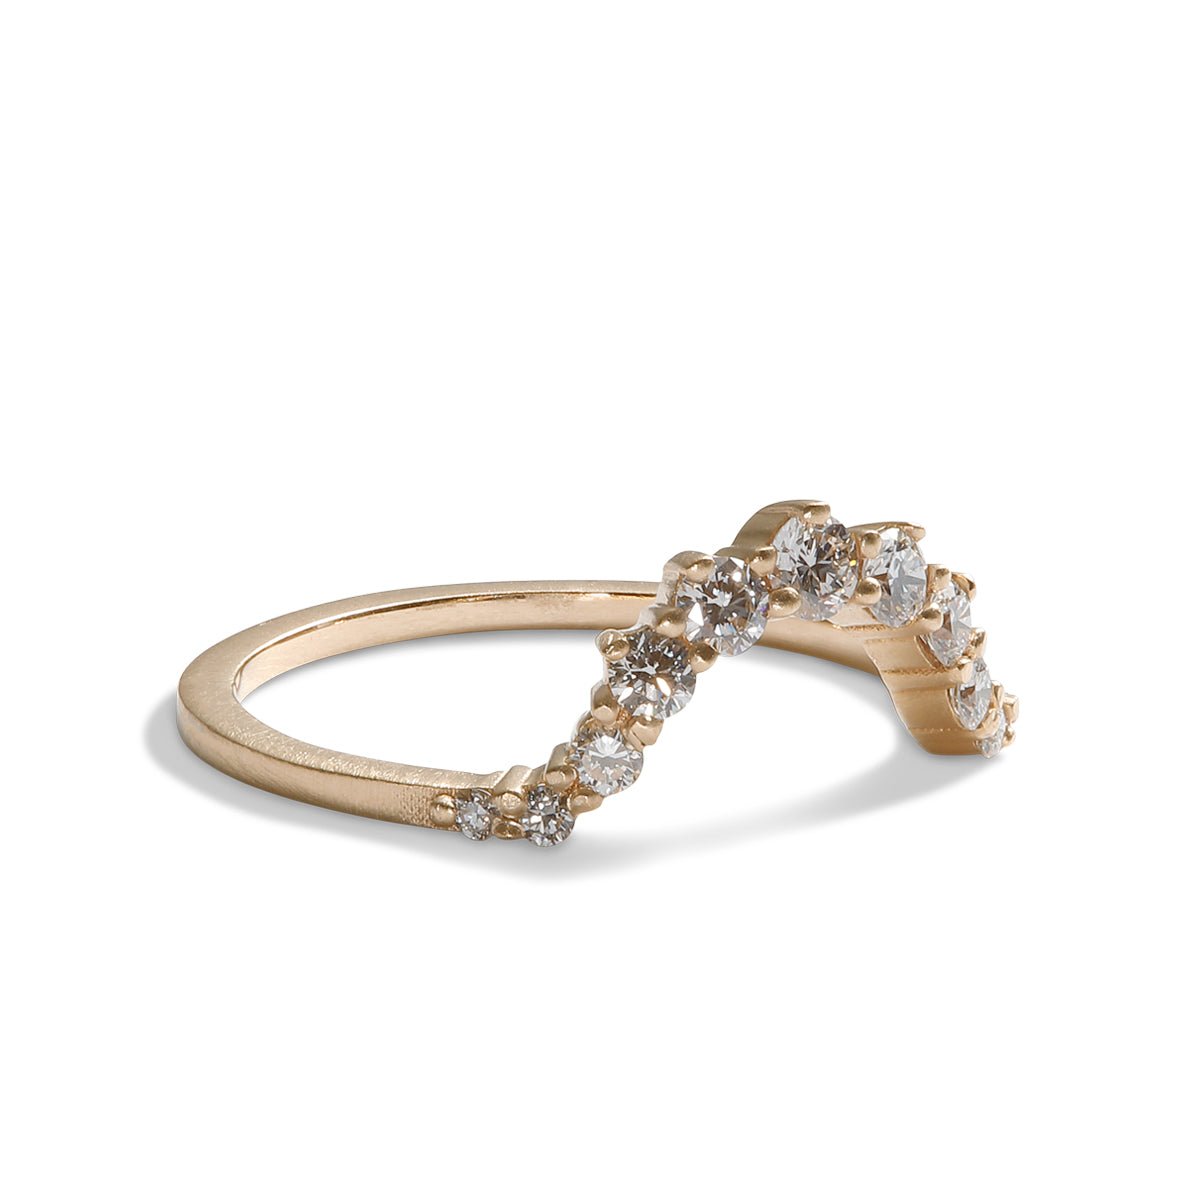 Arched Ortus ring, with prong set lab-grown diamonds. This contoured stacking band is made of 14K recycled gold.